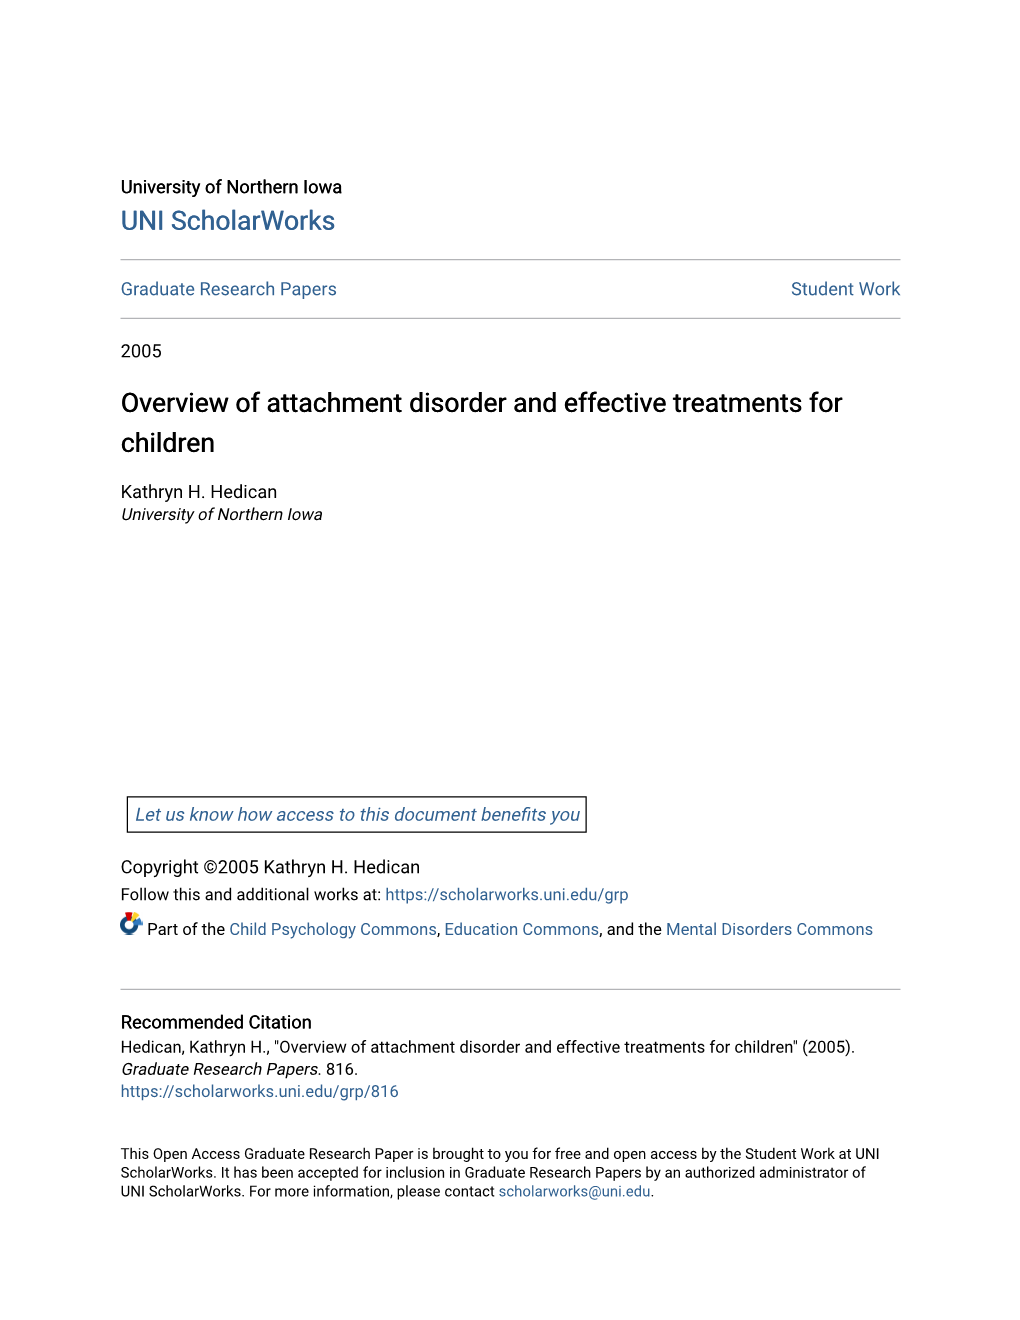 Overview of Attachment Disorder and Effective Treatments for Children